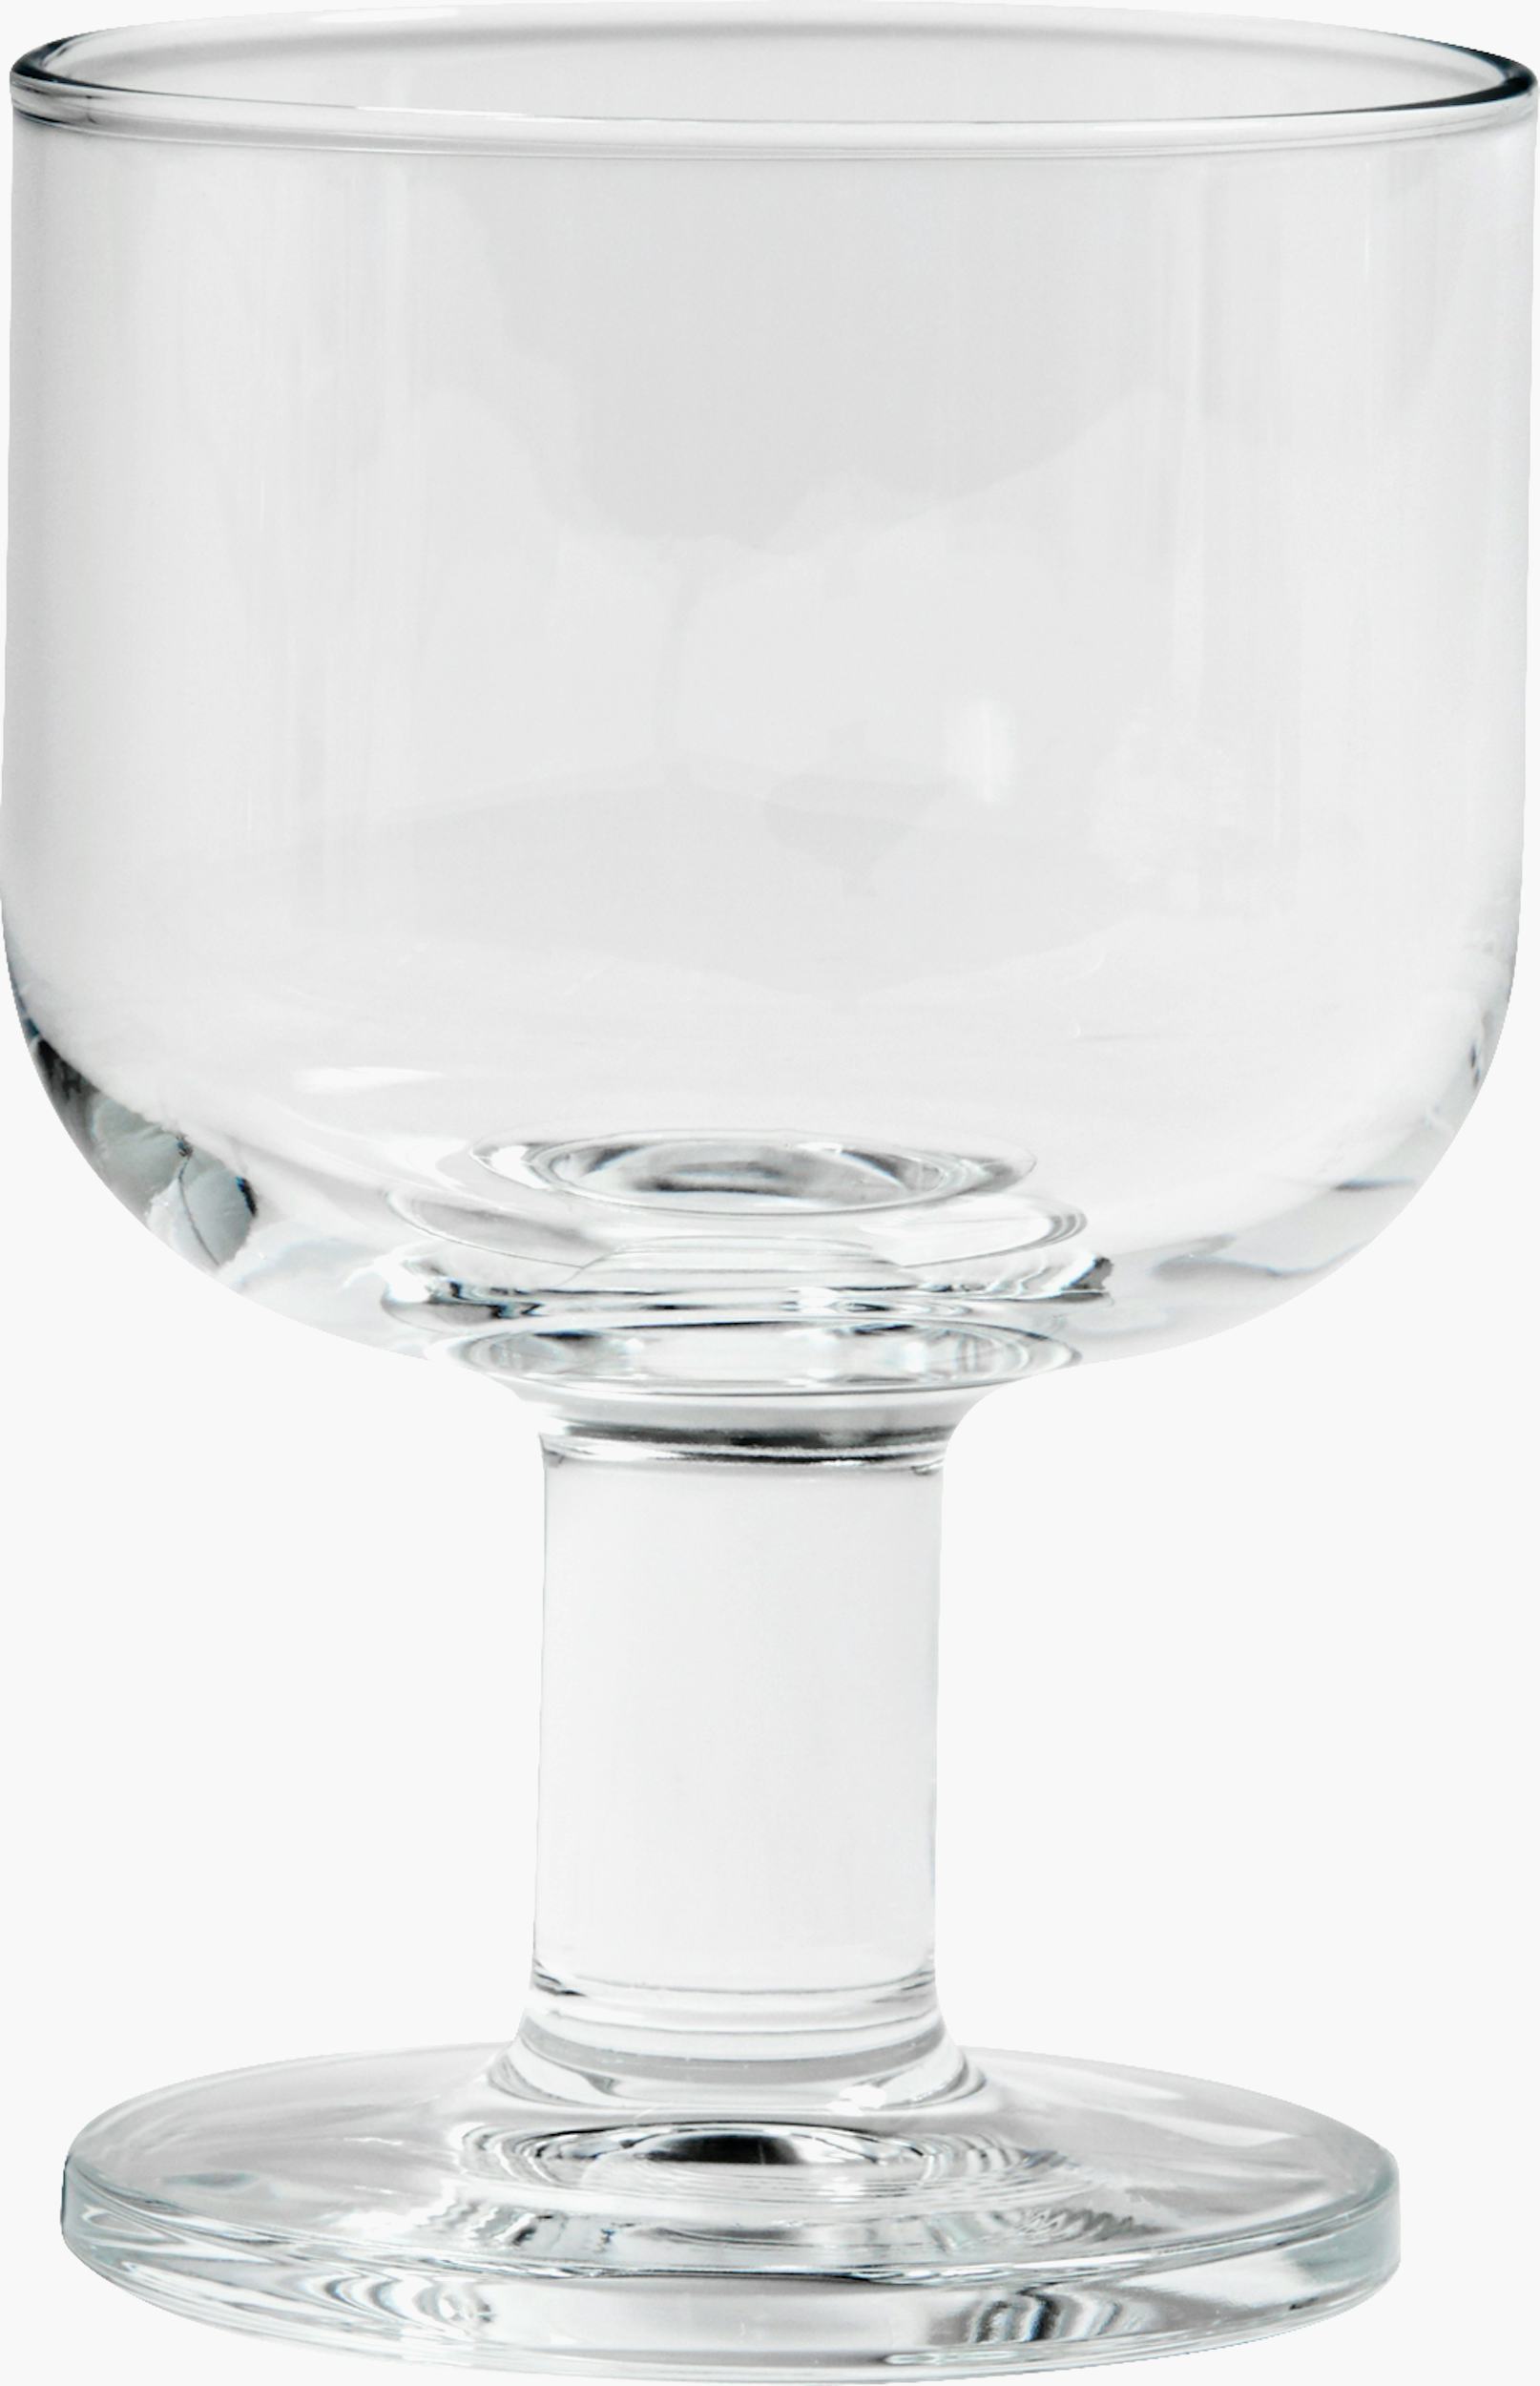 Bormioli Rocco Hosteria Glasses Review: The Best Stackable Wine Glasses